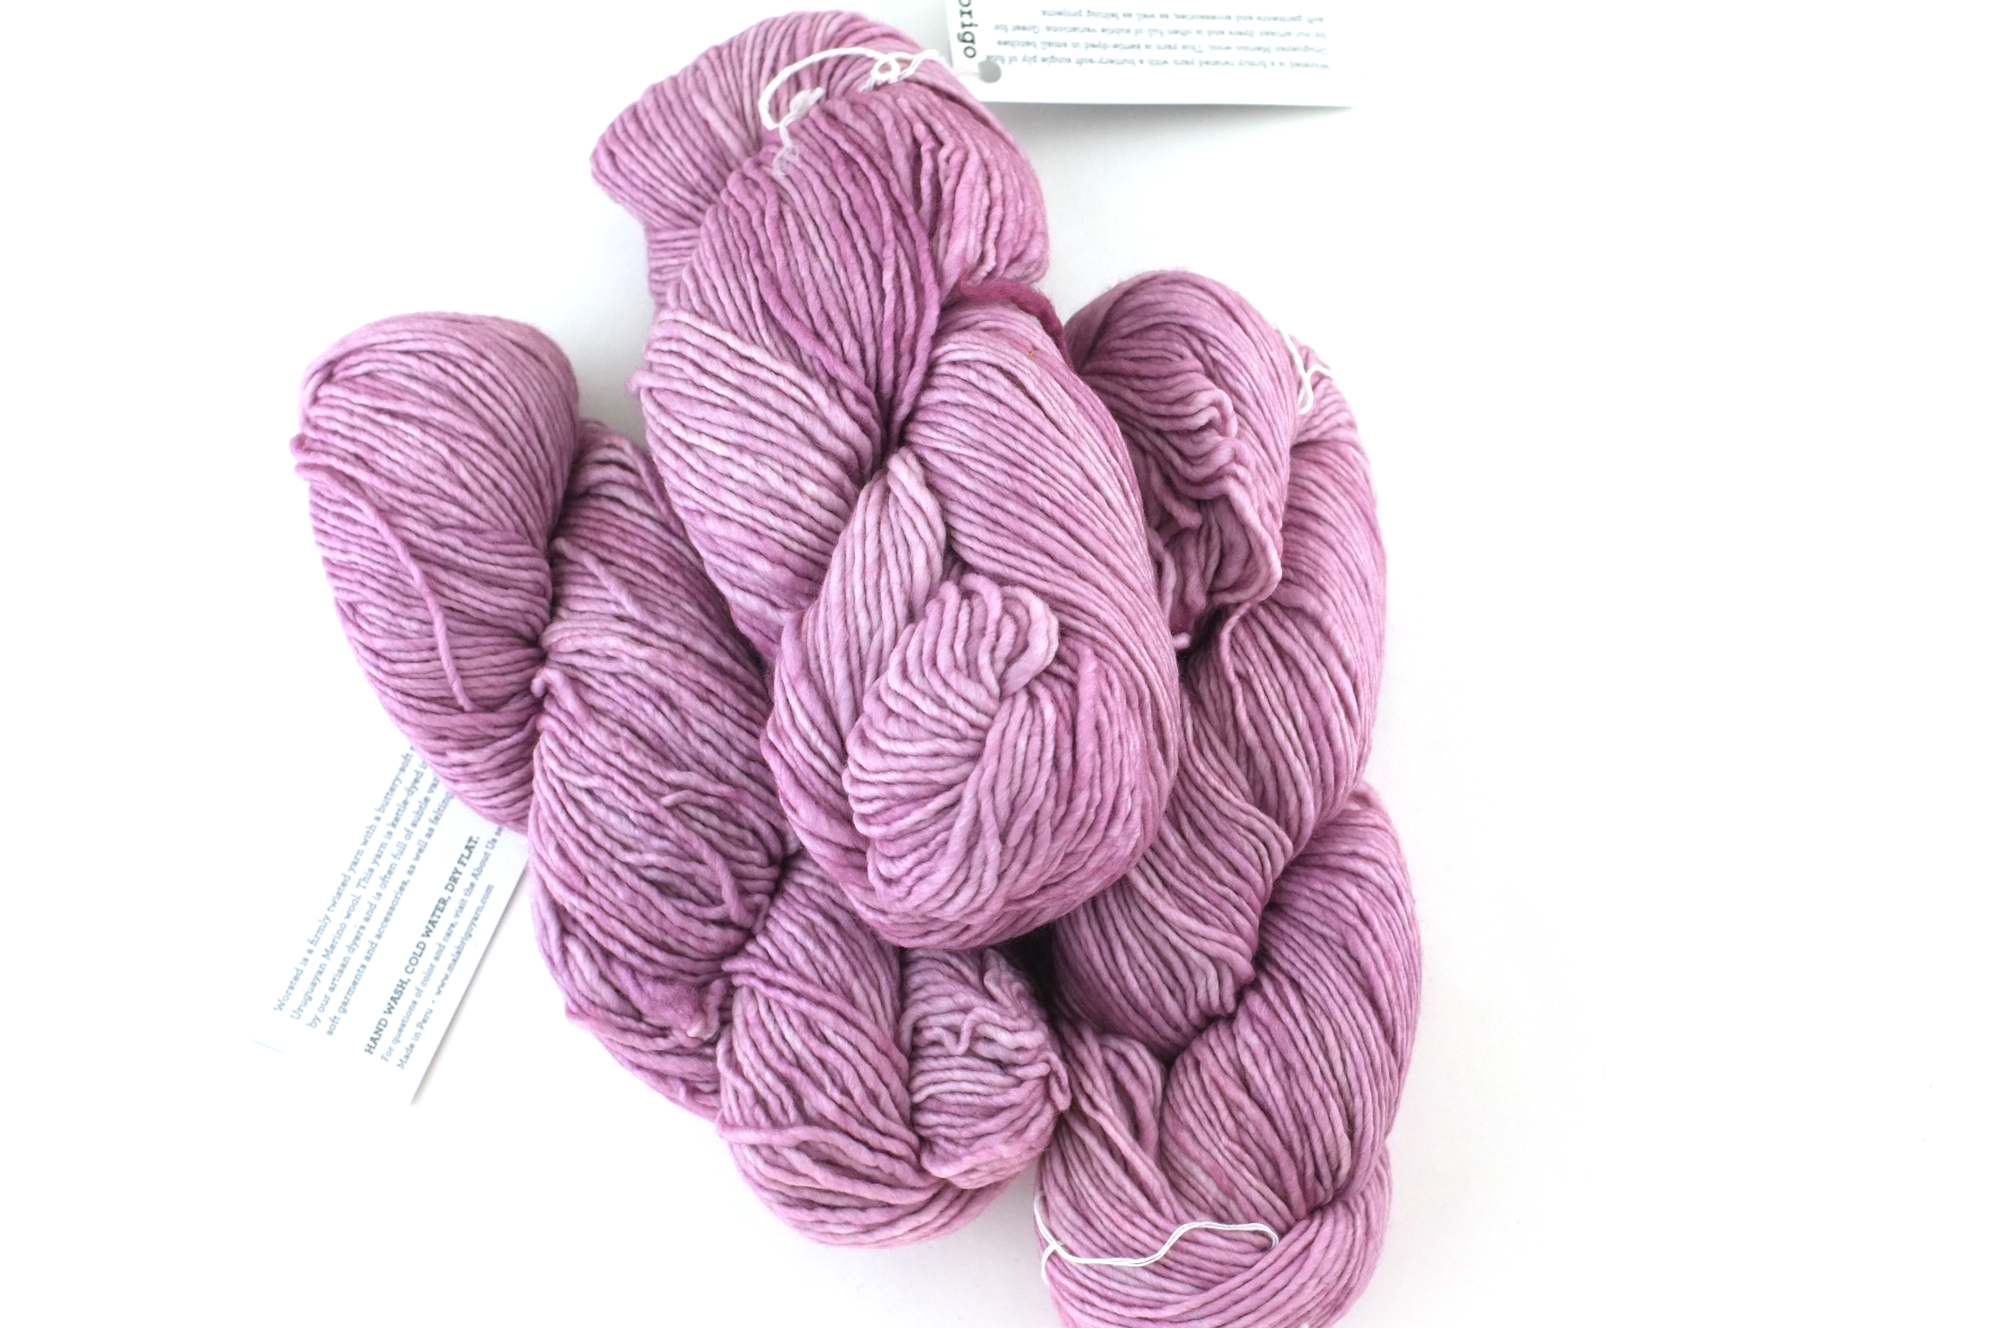 Meriwool Dusty Pink – We are knitters